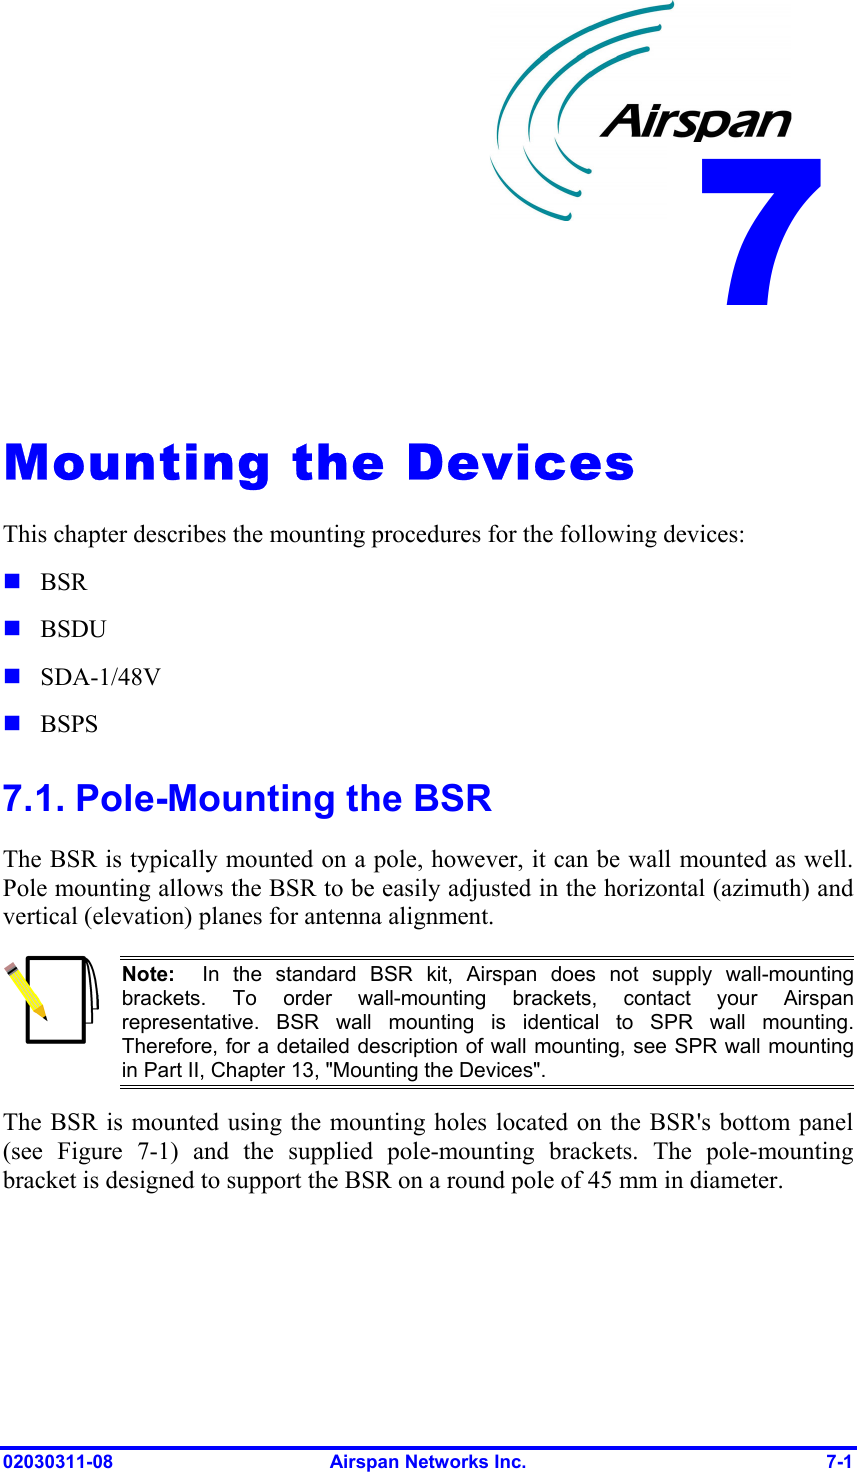  02030311-08  Airspan Networks Inc.  7-1   Mounting the Devices This chapter describes the mounting procedures for the following devices:  BSR  BSDU  SDA-1/48V  BSPS 7.1. Pole-Mounting the BSR The BSR is typically mounted on a pole, however, it can be wall mounted as well. Pole mounting allows the BSR to be easily adjusted in the horizontal (azimuth) and vertical (elevation) planes for antenna alignment.   Note:  In the standard BSR kit, Airspan does not supply wall-mounting brackets. To order wall-mounting brackets, contact your Airspan representative. BSR wall mounting is identical to SPR wall mounting.Therefore, for a detailed description of wall mounting, see SPR wall mountingin Part II, Chapter 13, &quot;Mounting the Devices&quot;. The BSR is mounted using the mounting holes located on the BSR&apos;s bottom panel (see Figure  7-1) and the supplied pole-mounting brackets. The pole-mounting bracket is designed to support the BSR on a round pole of 45 mm in diameter. 8 7 